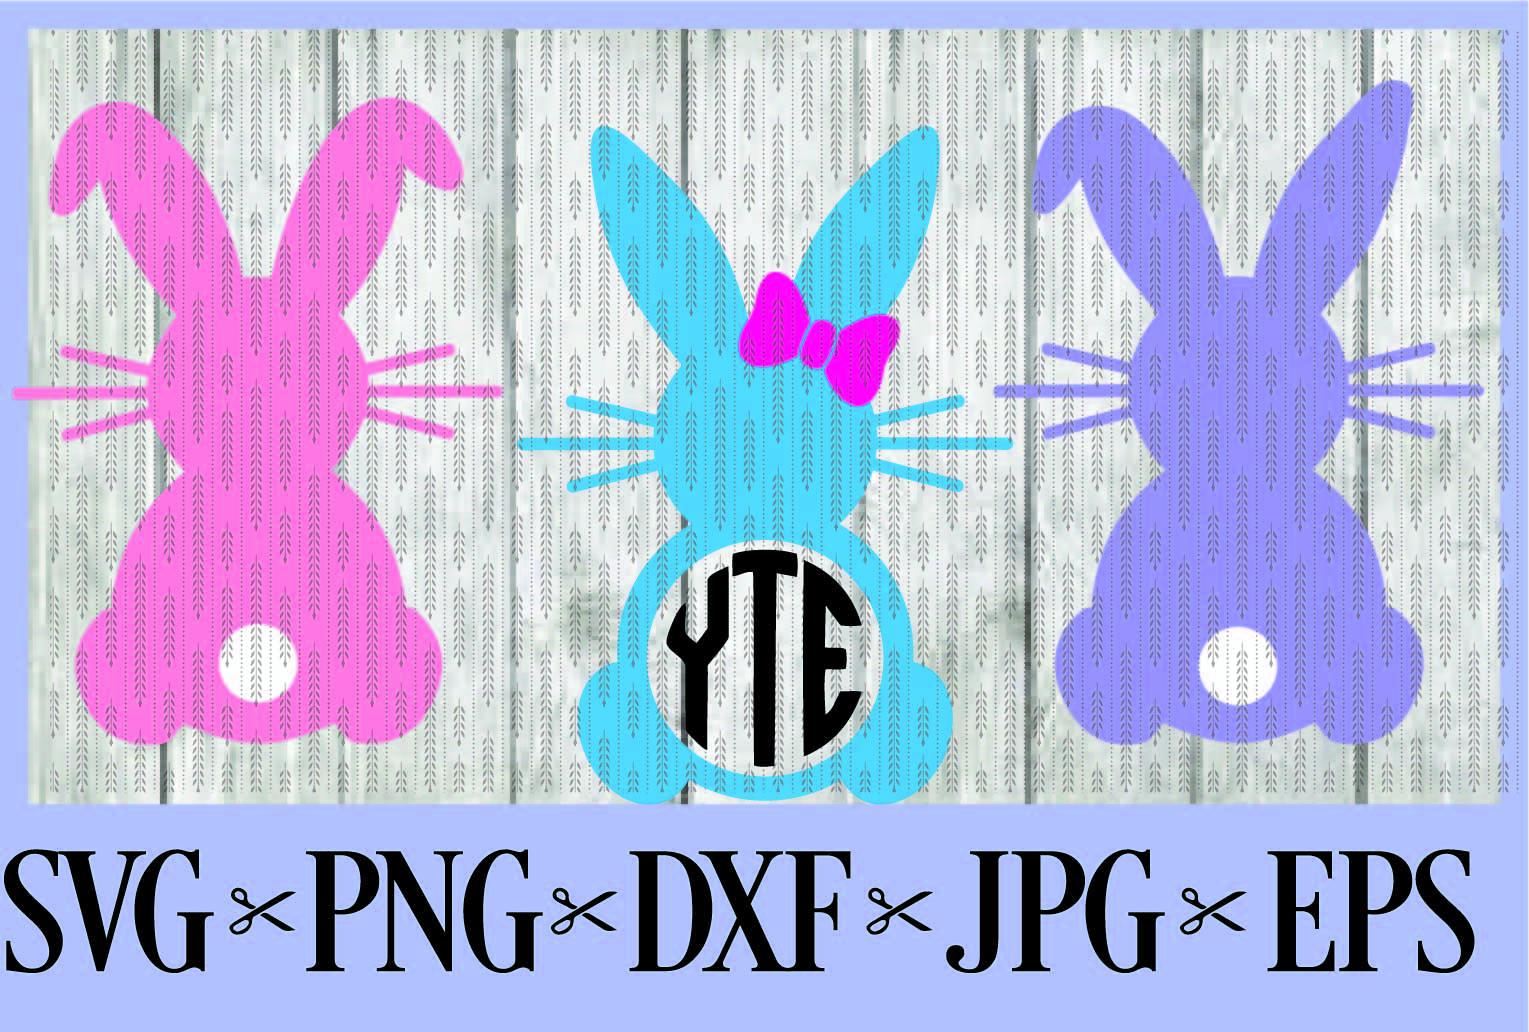 Download Easter Bunny silhouette and Monogram frames - SVG, PNG DXF, EPS, JPG Multiple files